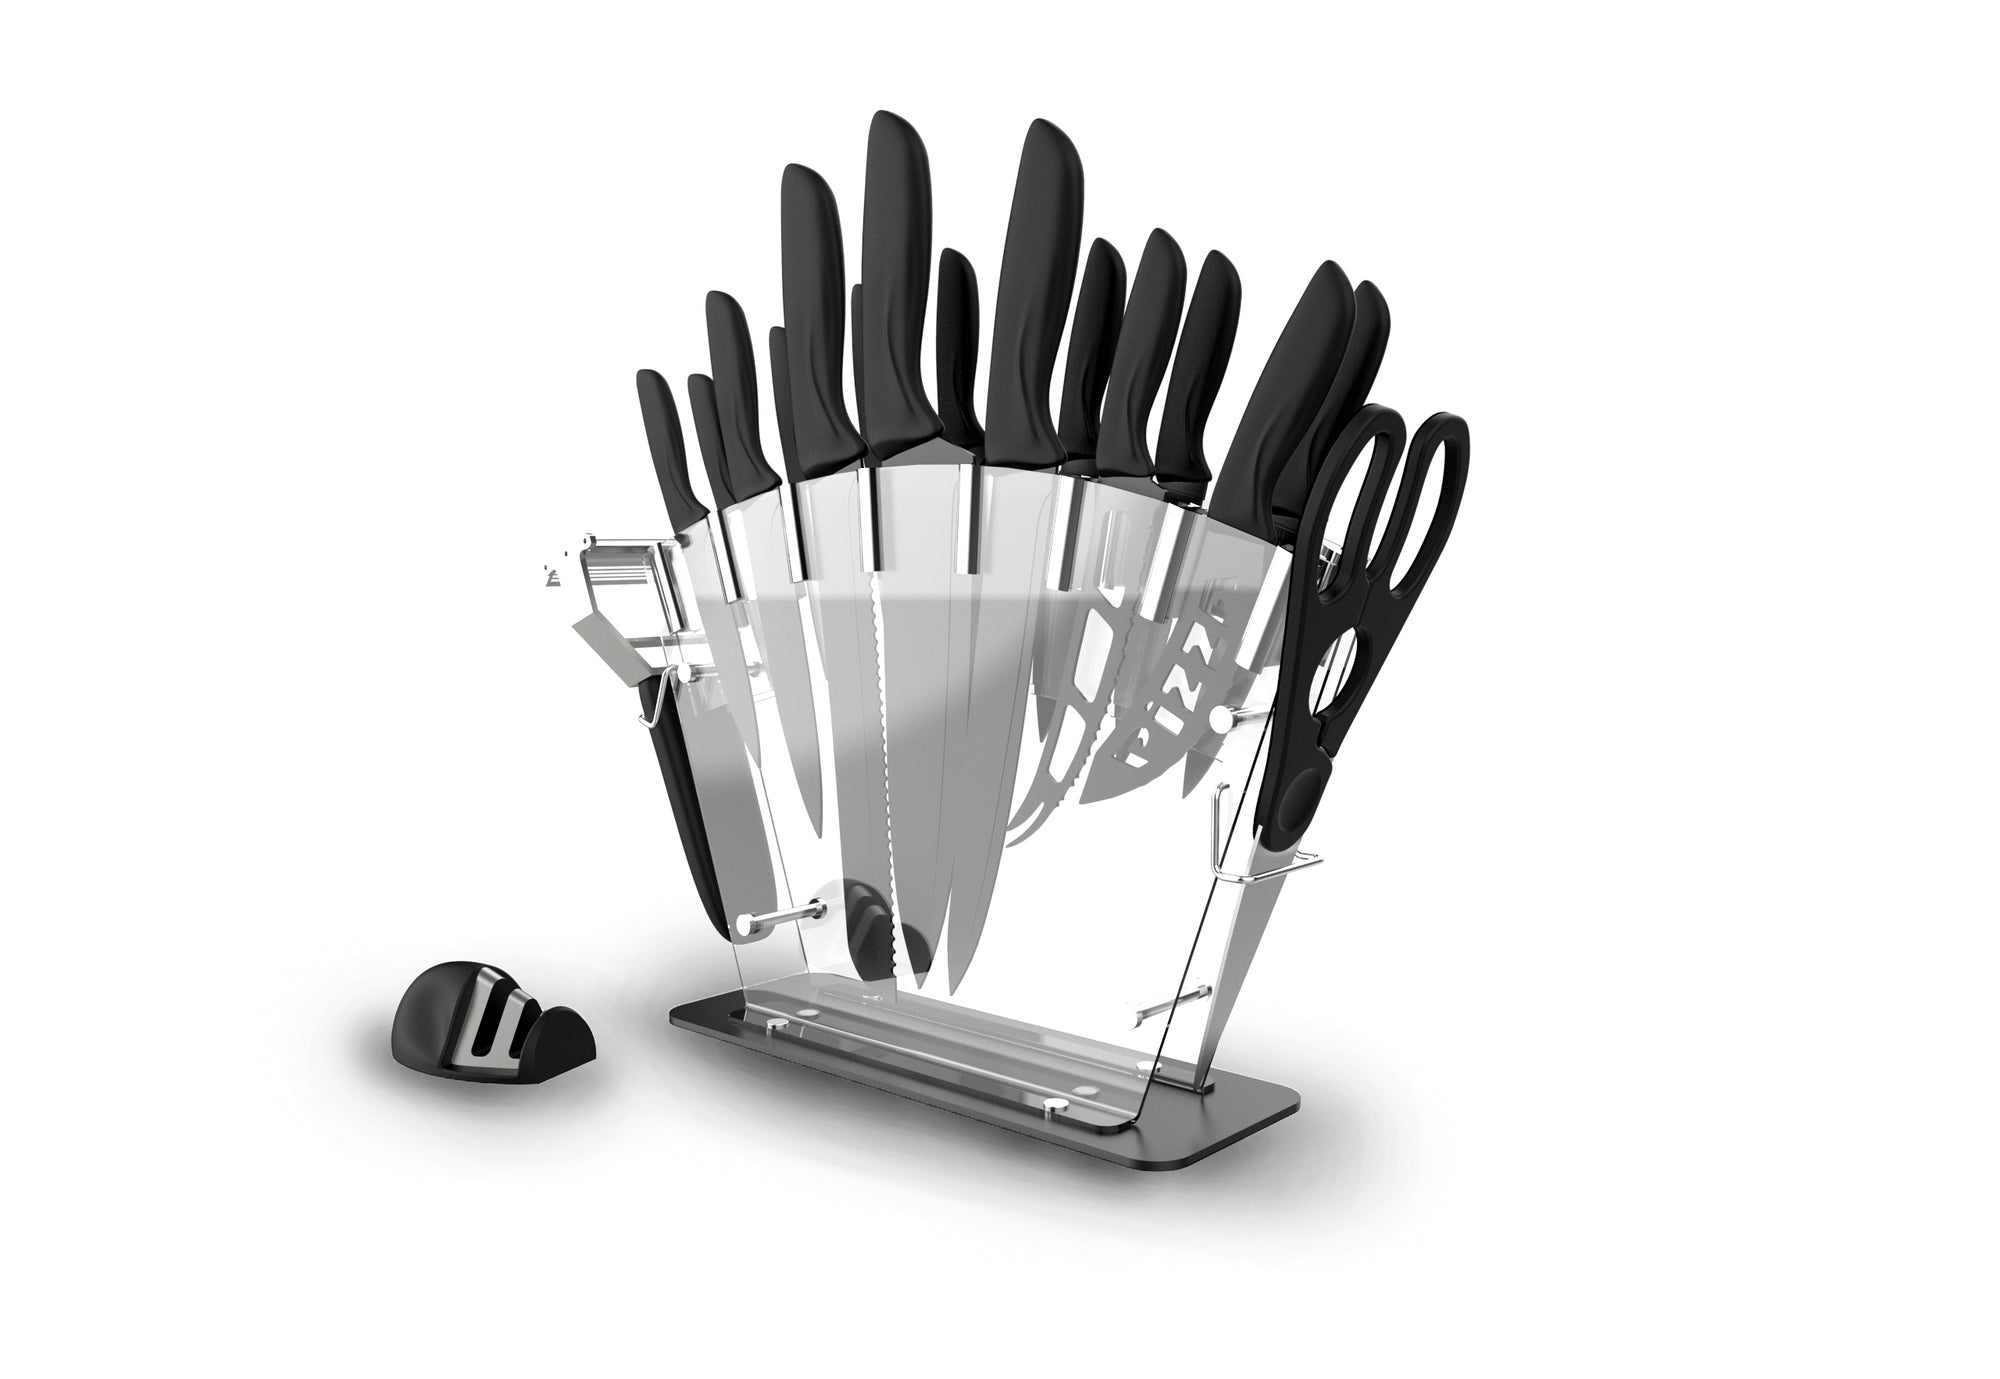 16 Piece Knife Set With Clear Arcrylic Knife Holder